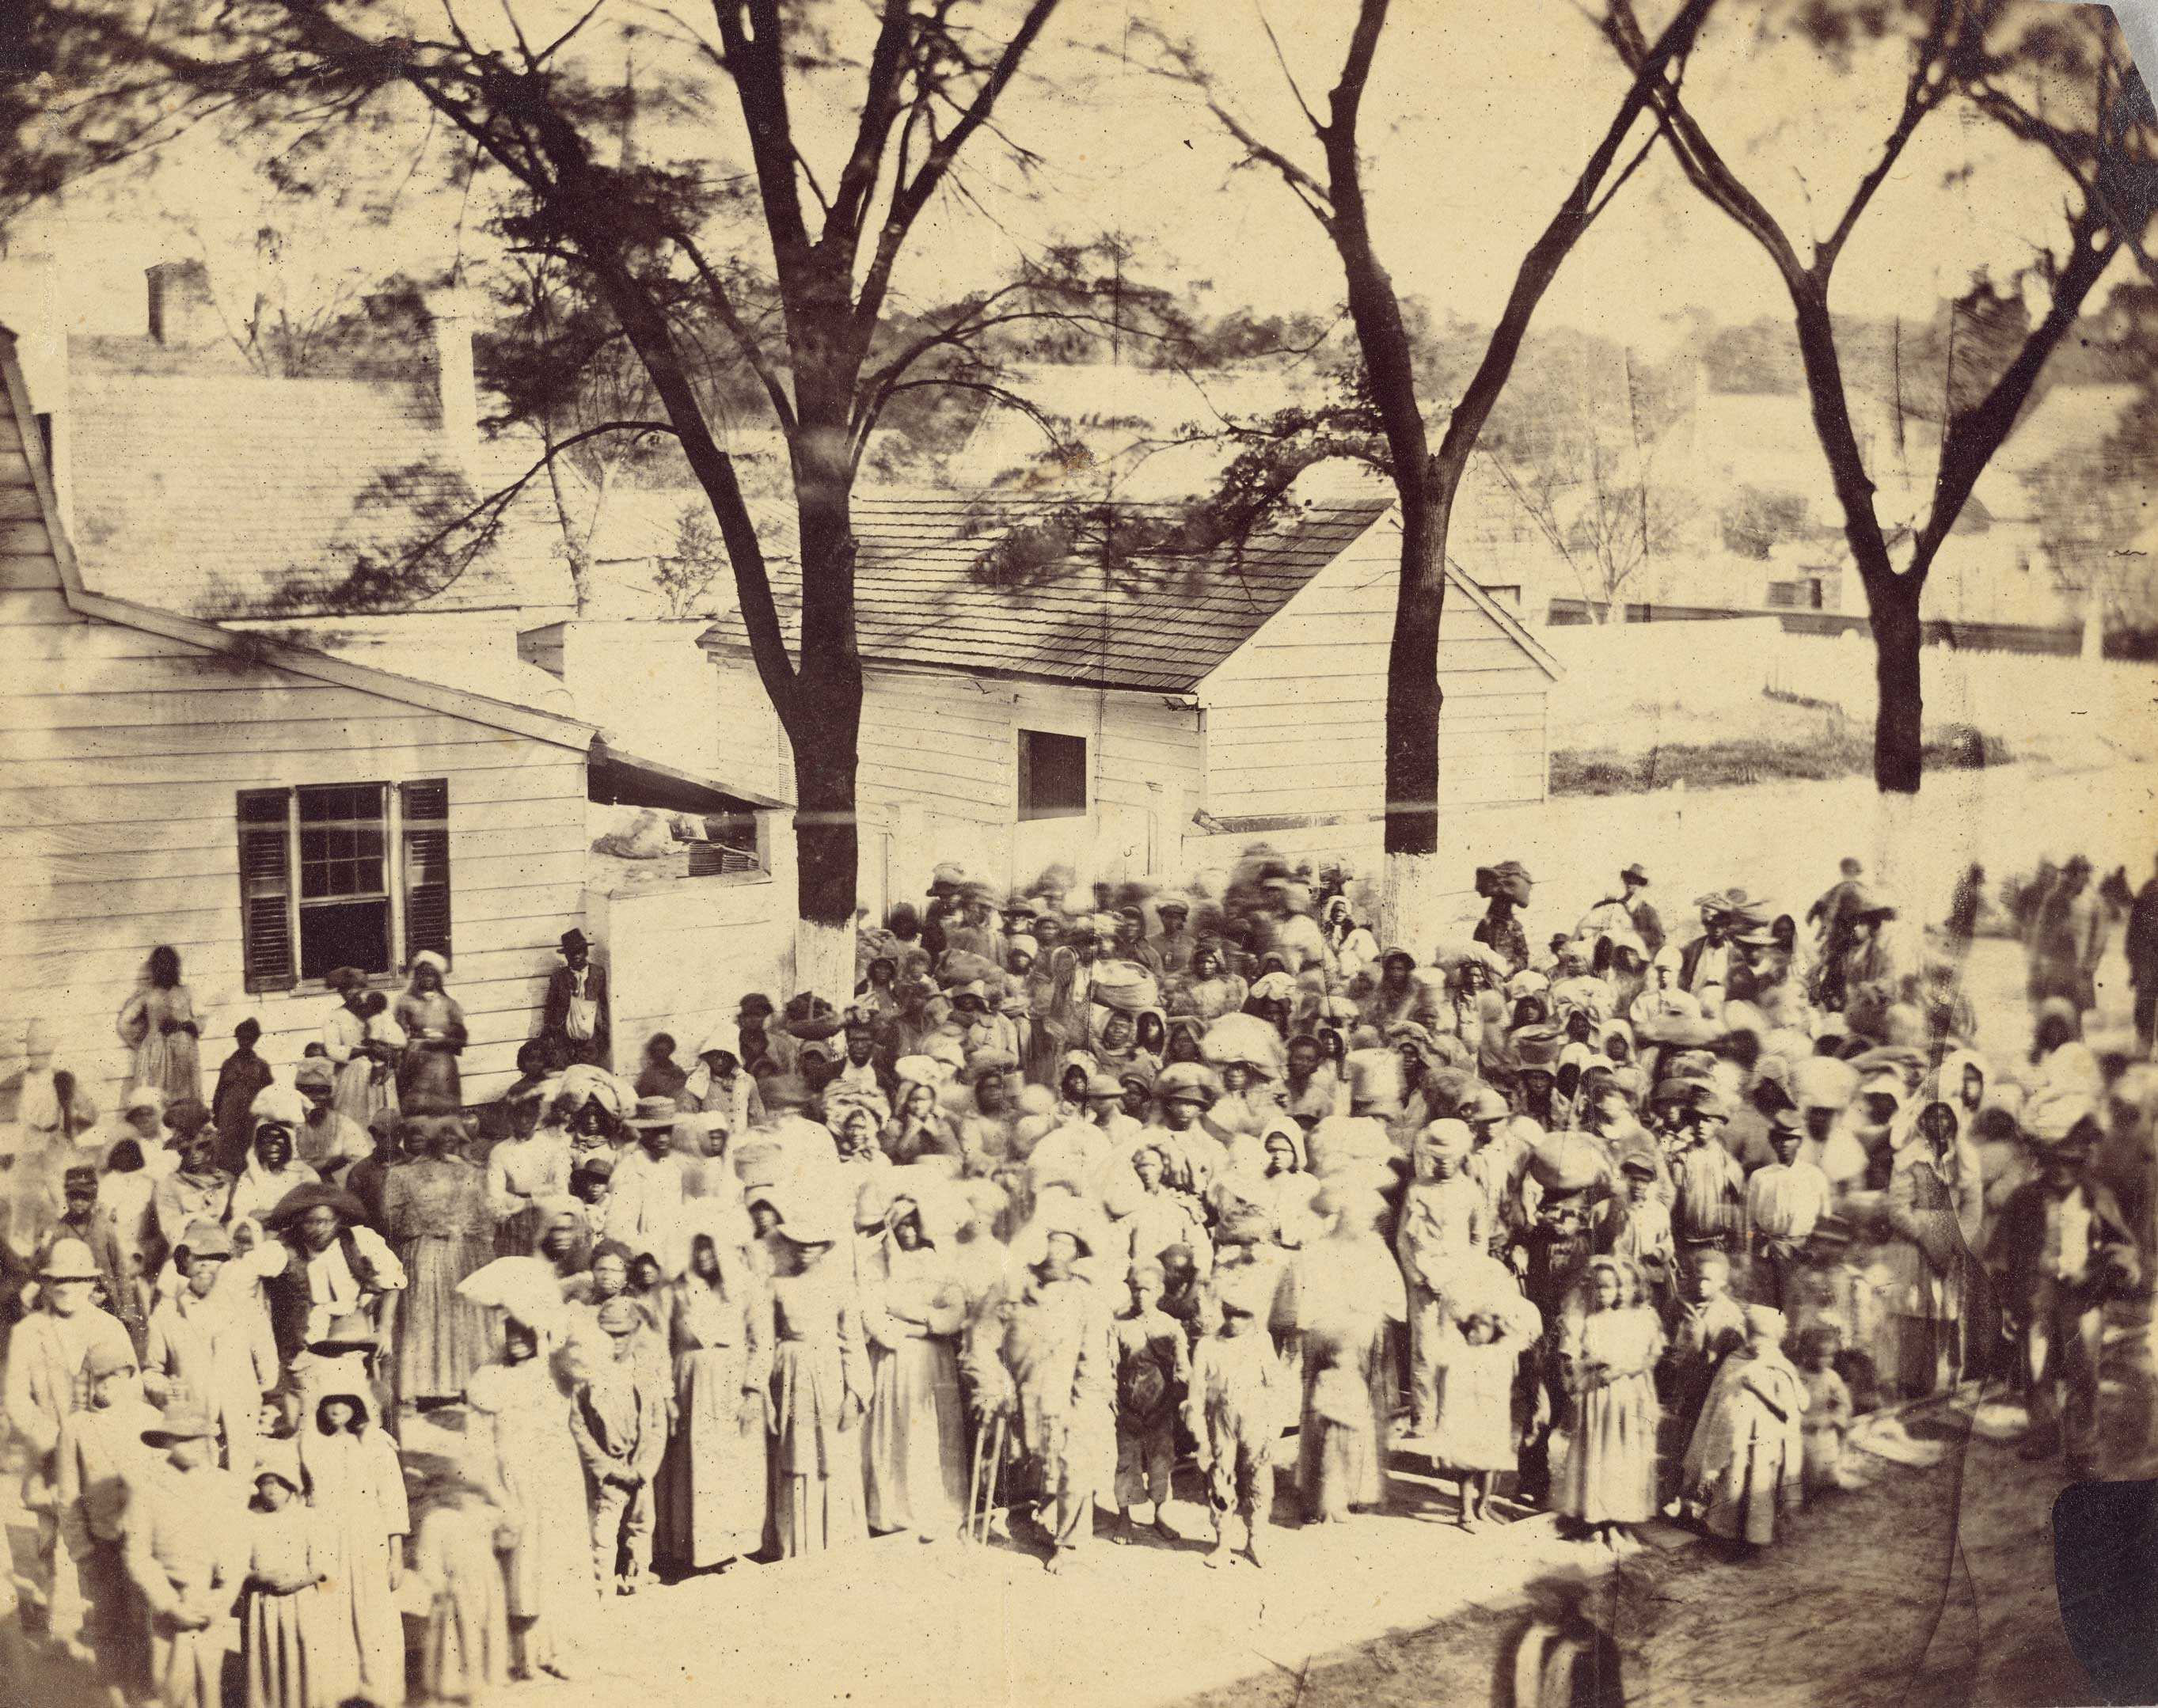 A worn black and white photograph that is slightly exposed of slaves standing in front of the cabins on J. J. Smith's cotton plantation near Beaufort, South Carolina.